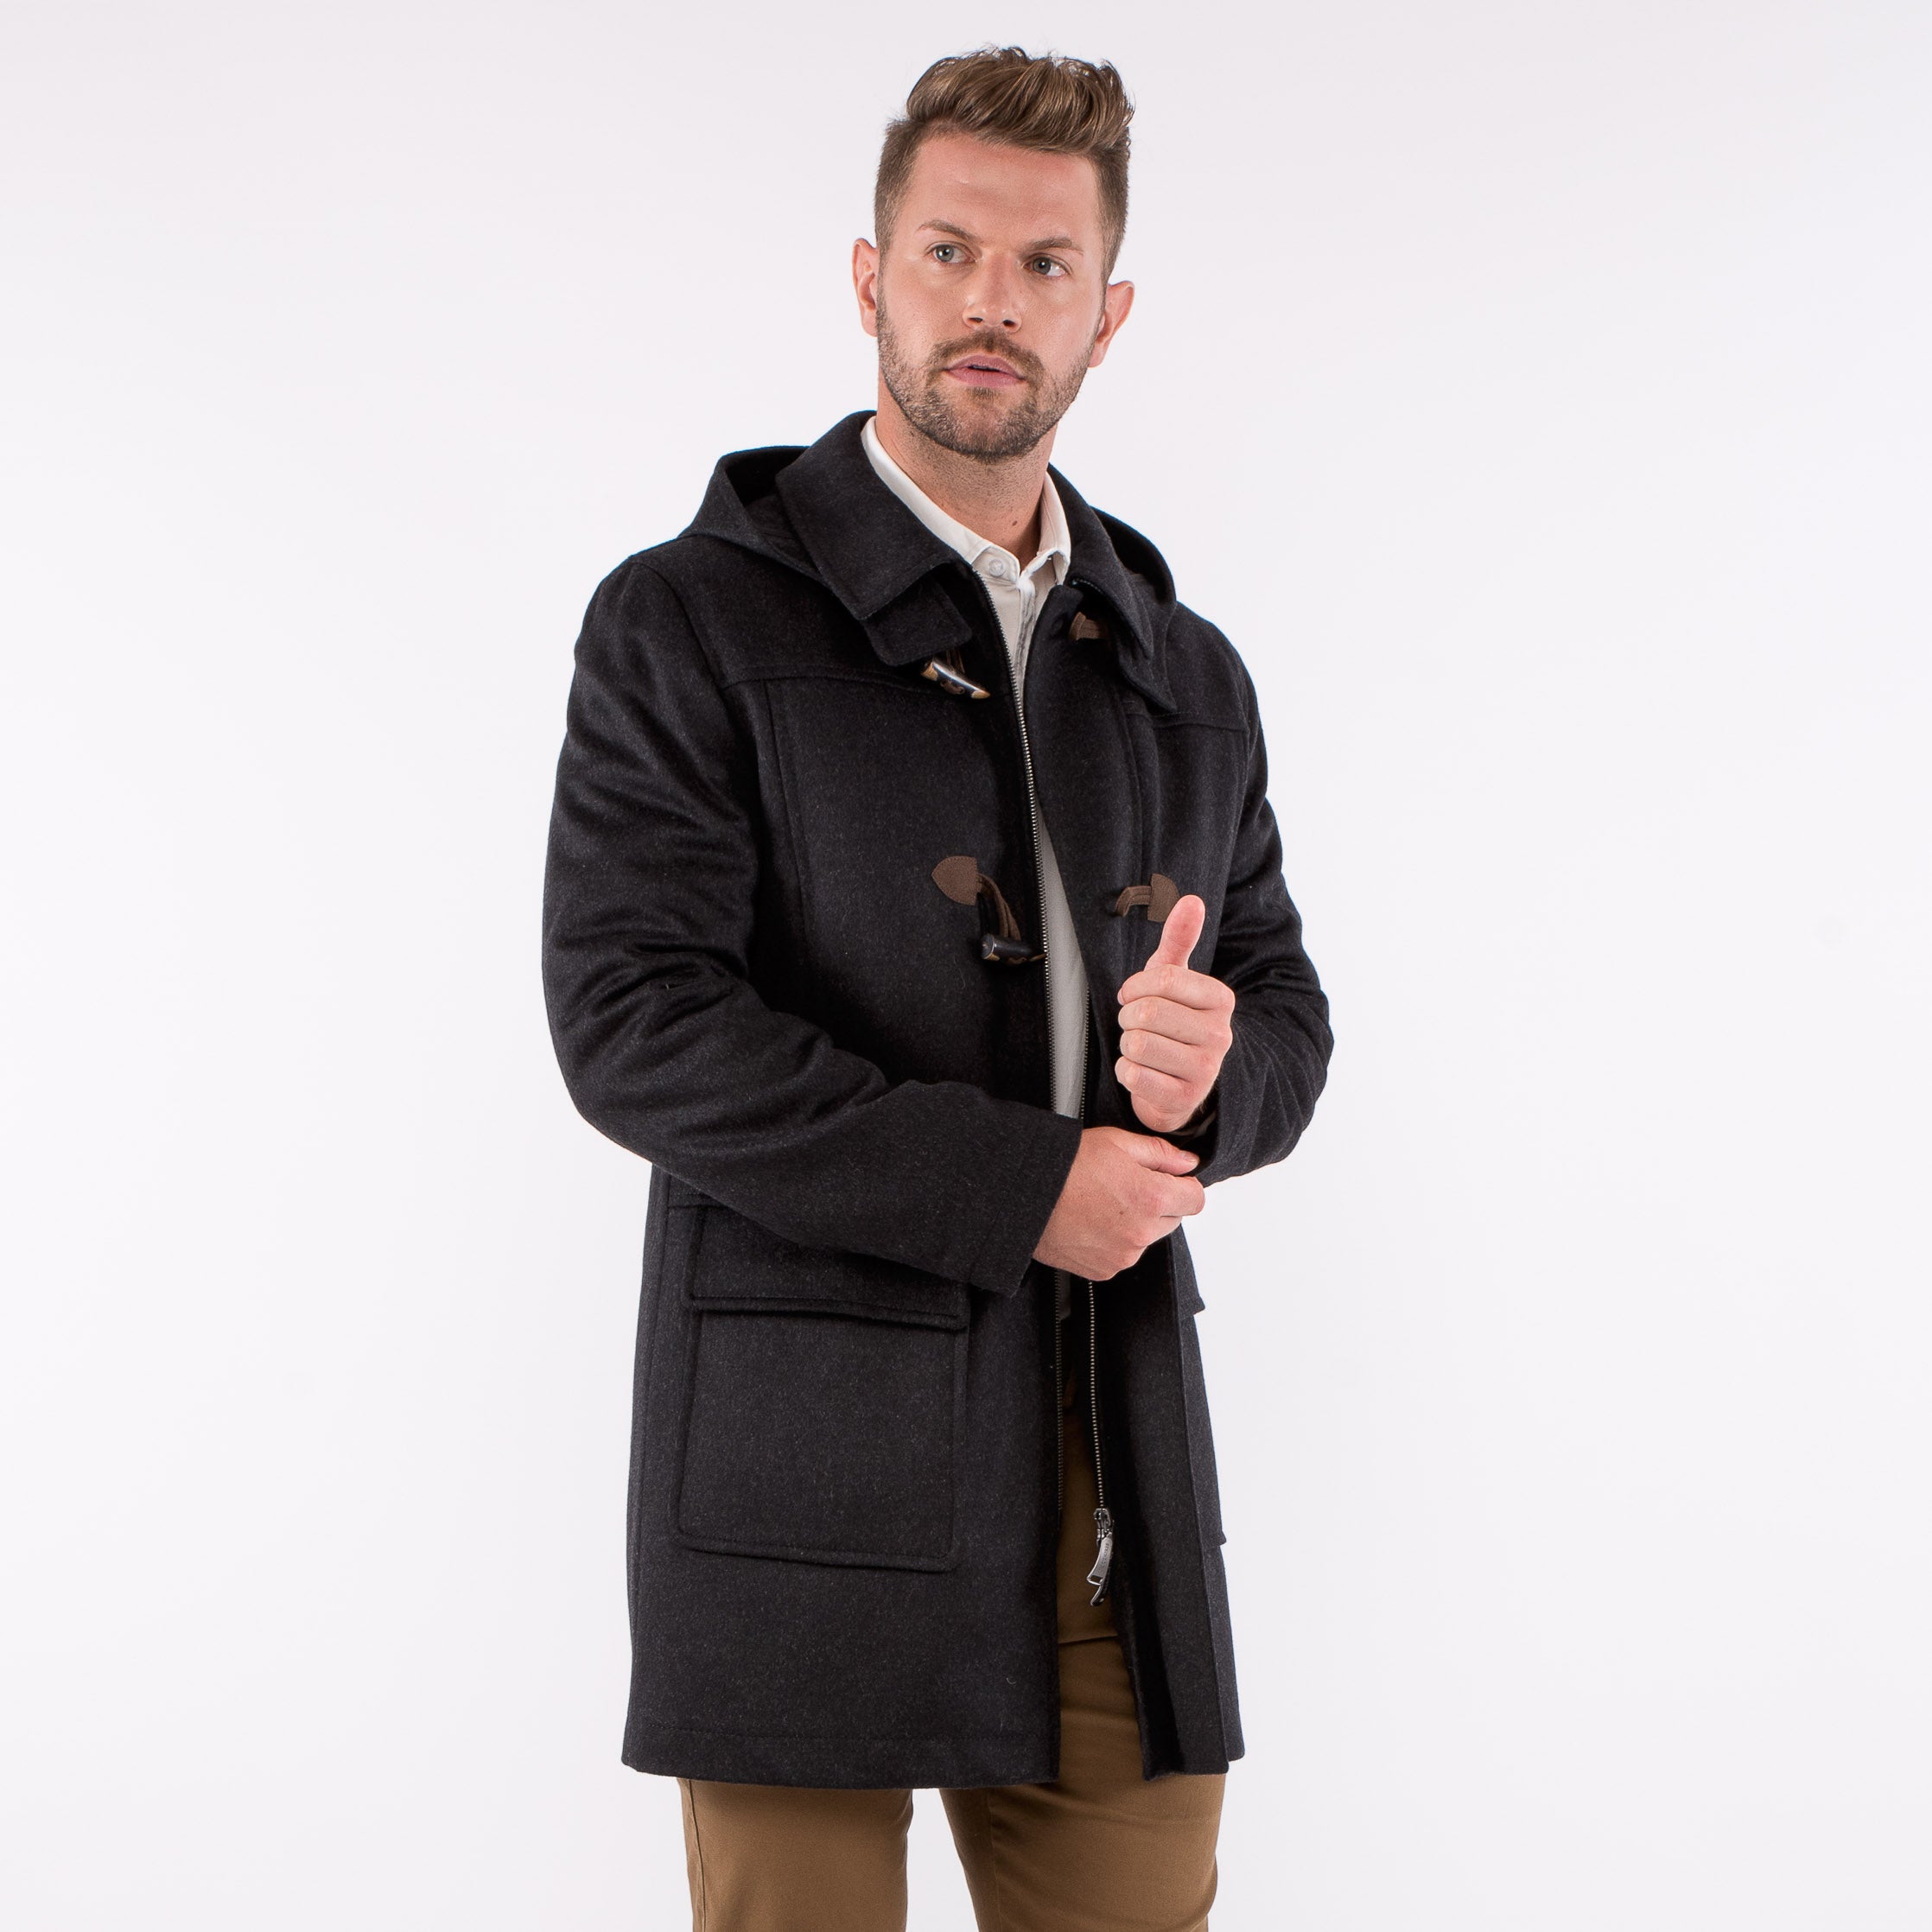 Thomas - Austrian Boiled Wool & Jacket in Charcoal